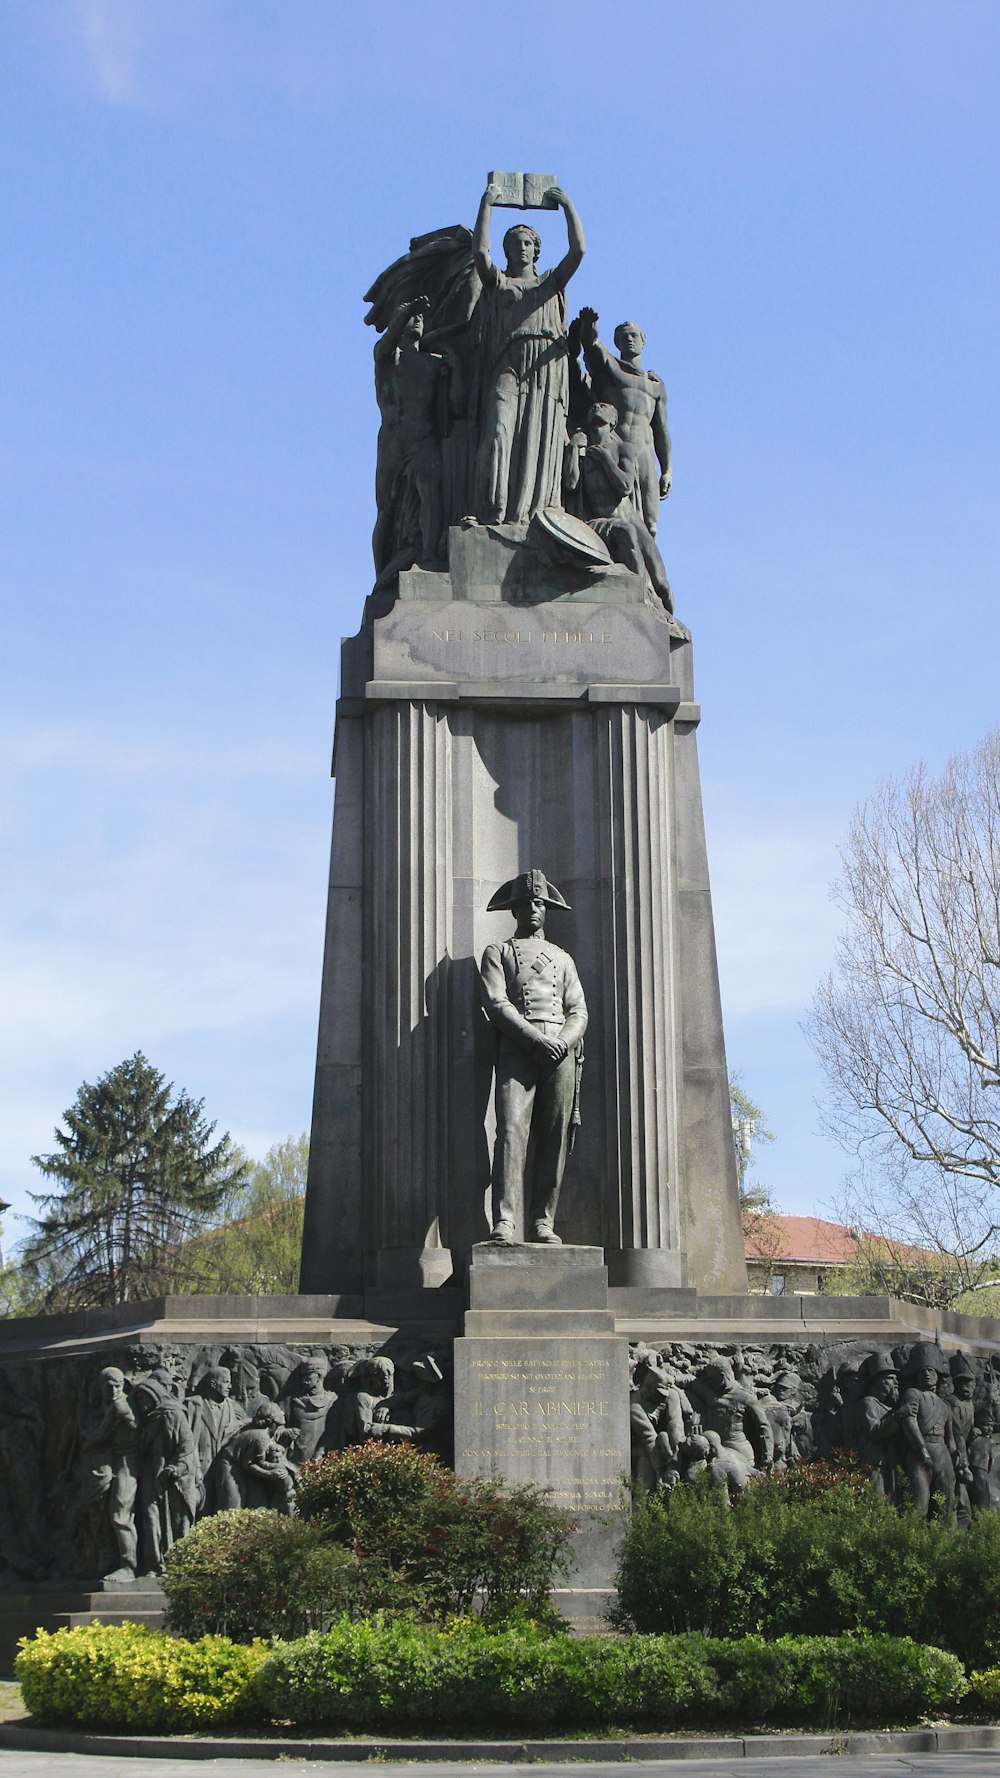 a monument with a statue of a man holding a sword